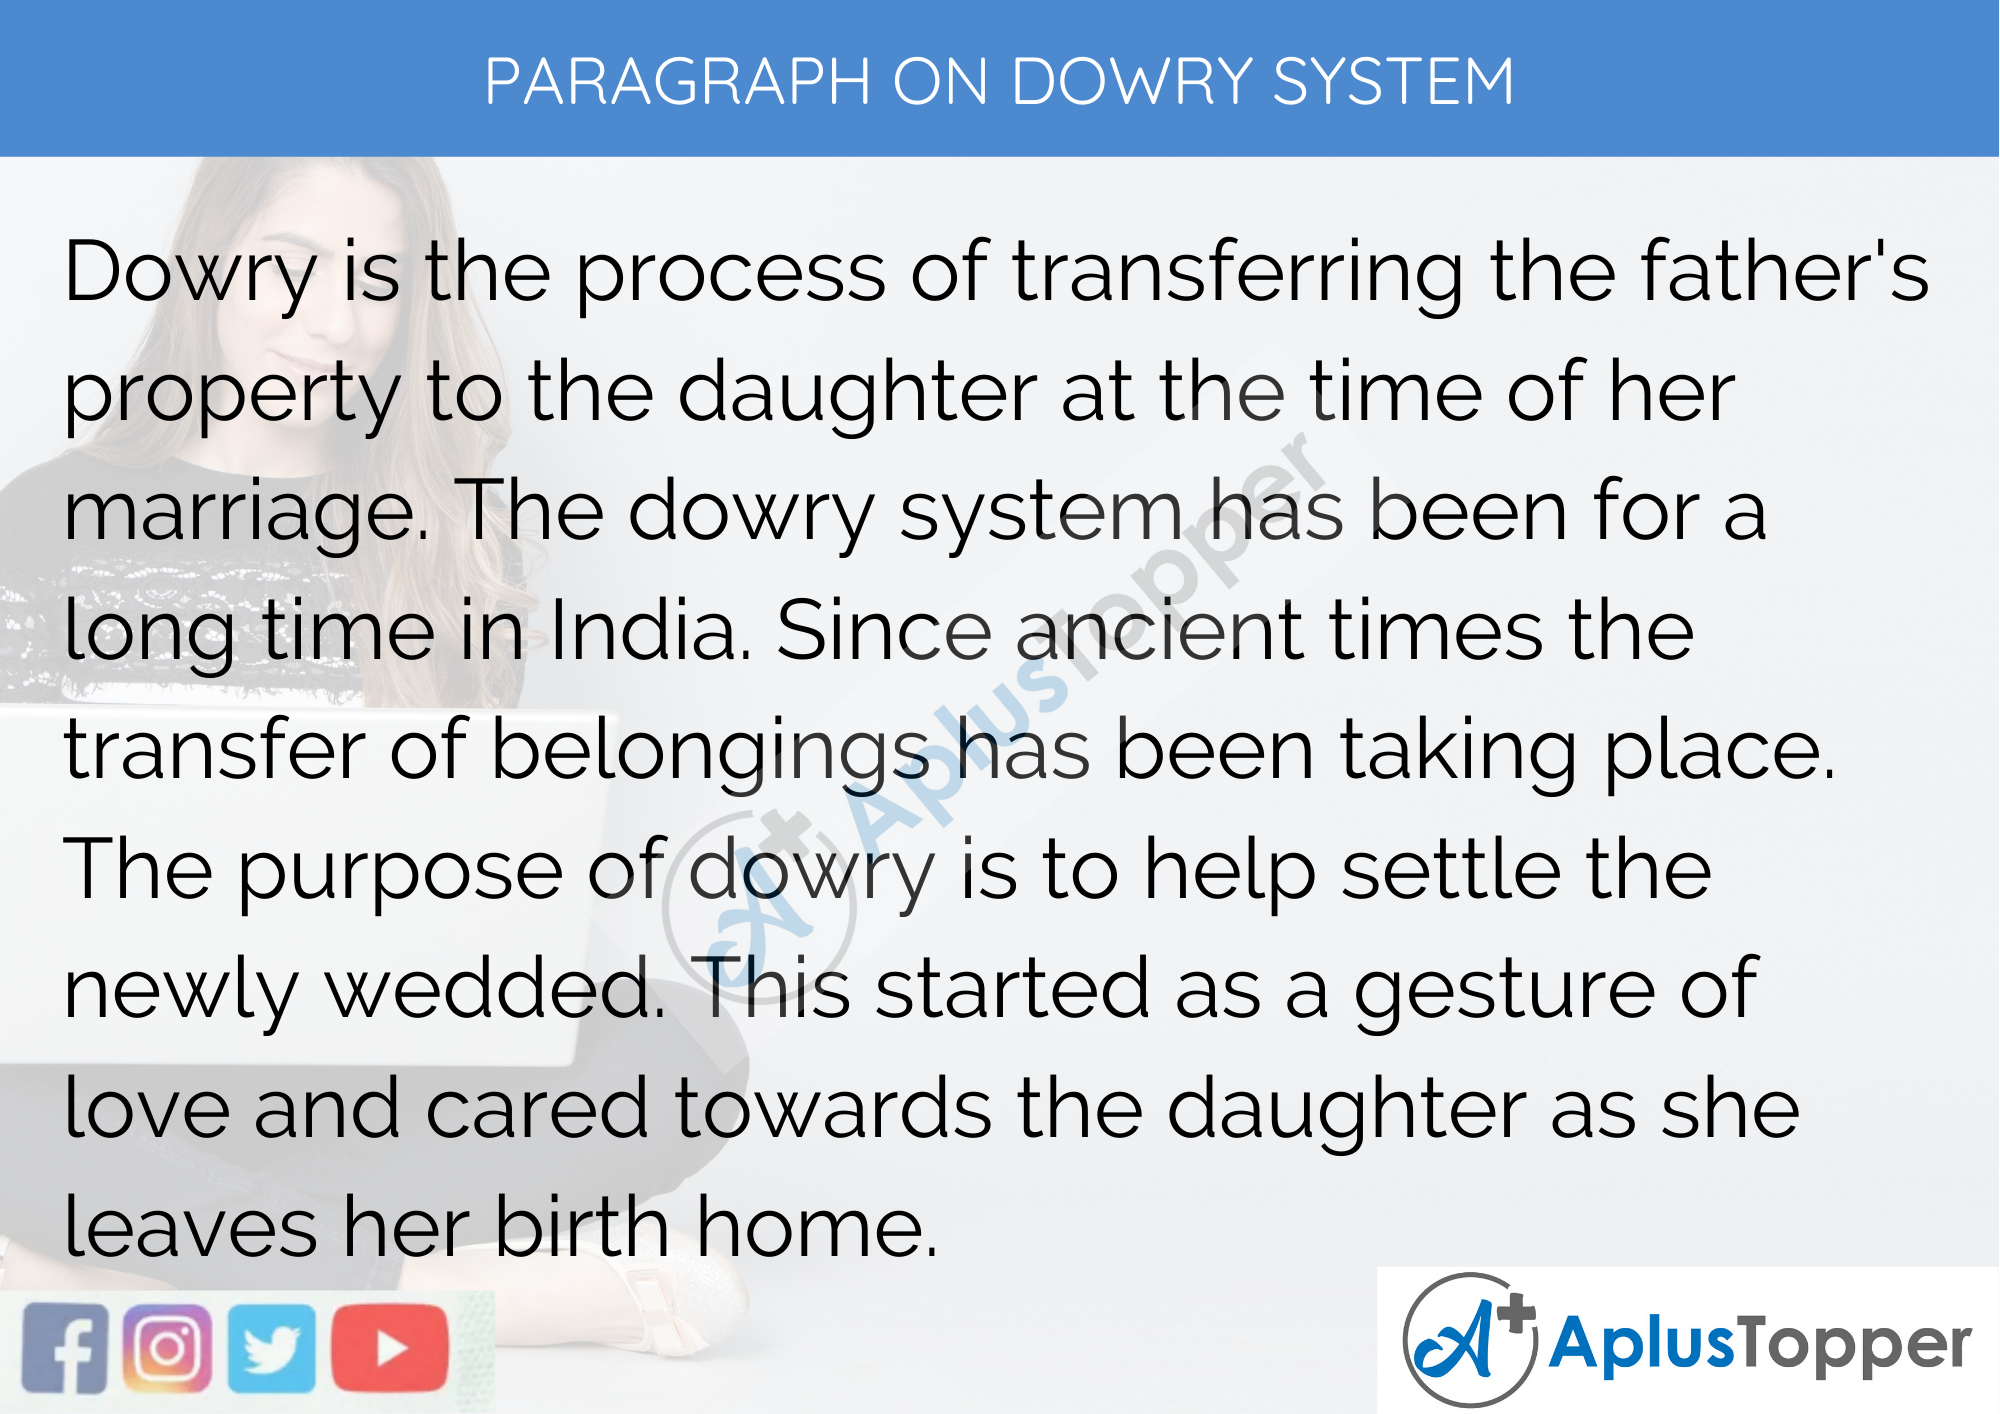 Paragraph on Dowry System - 100 Words for Classes 1, 2, and 3